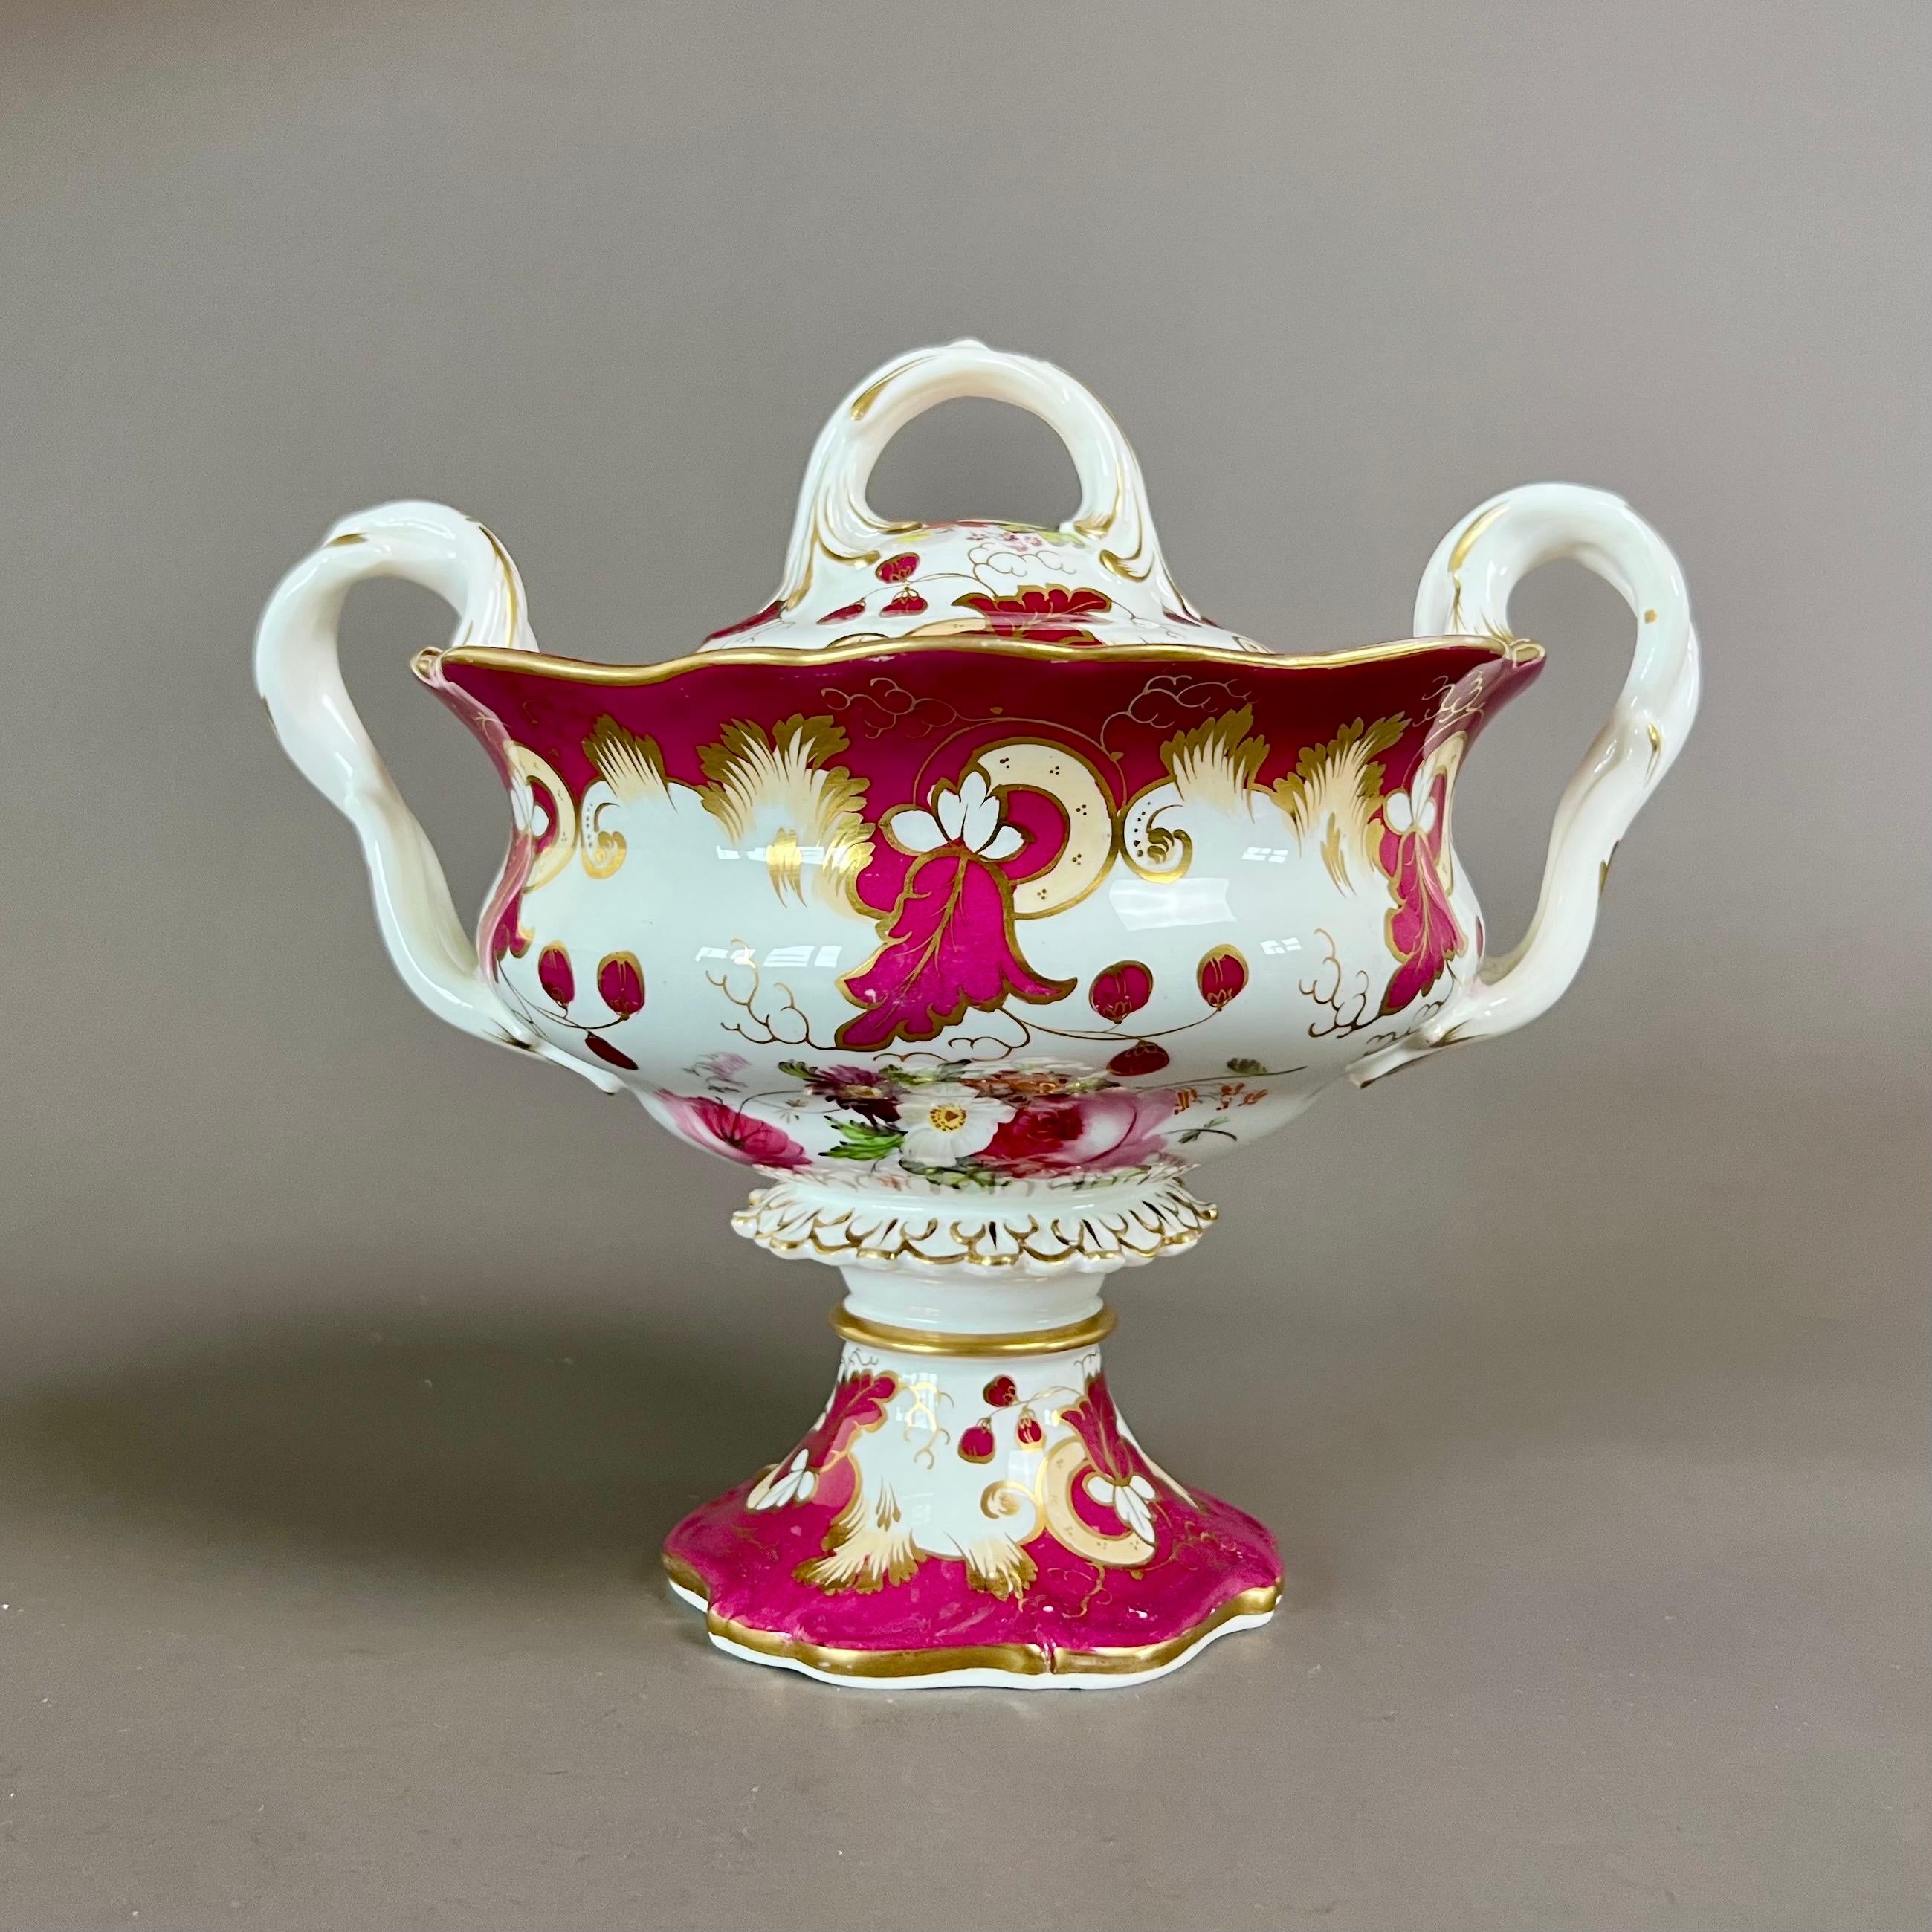 Rococo Revival Samuel Alcock Footed Porcelain Sauce Tureen, Maroon with Flower Sprays, ca 1842 For Sale